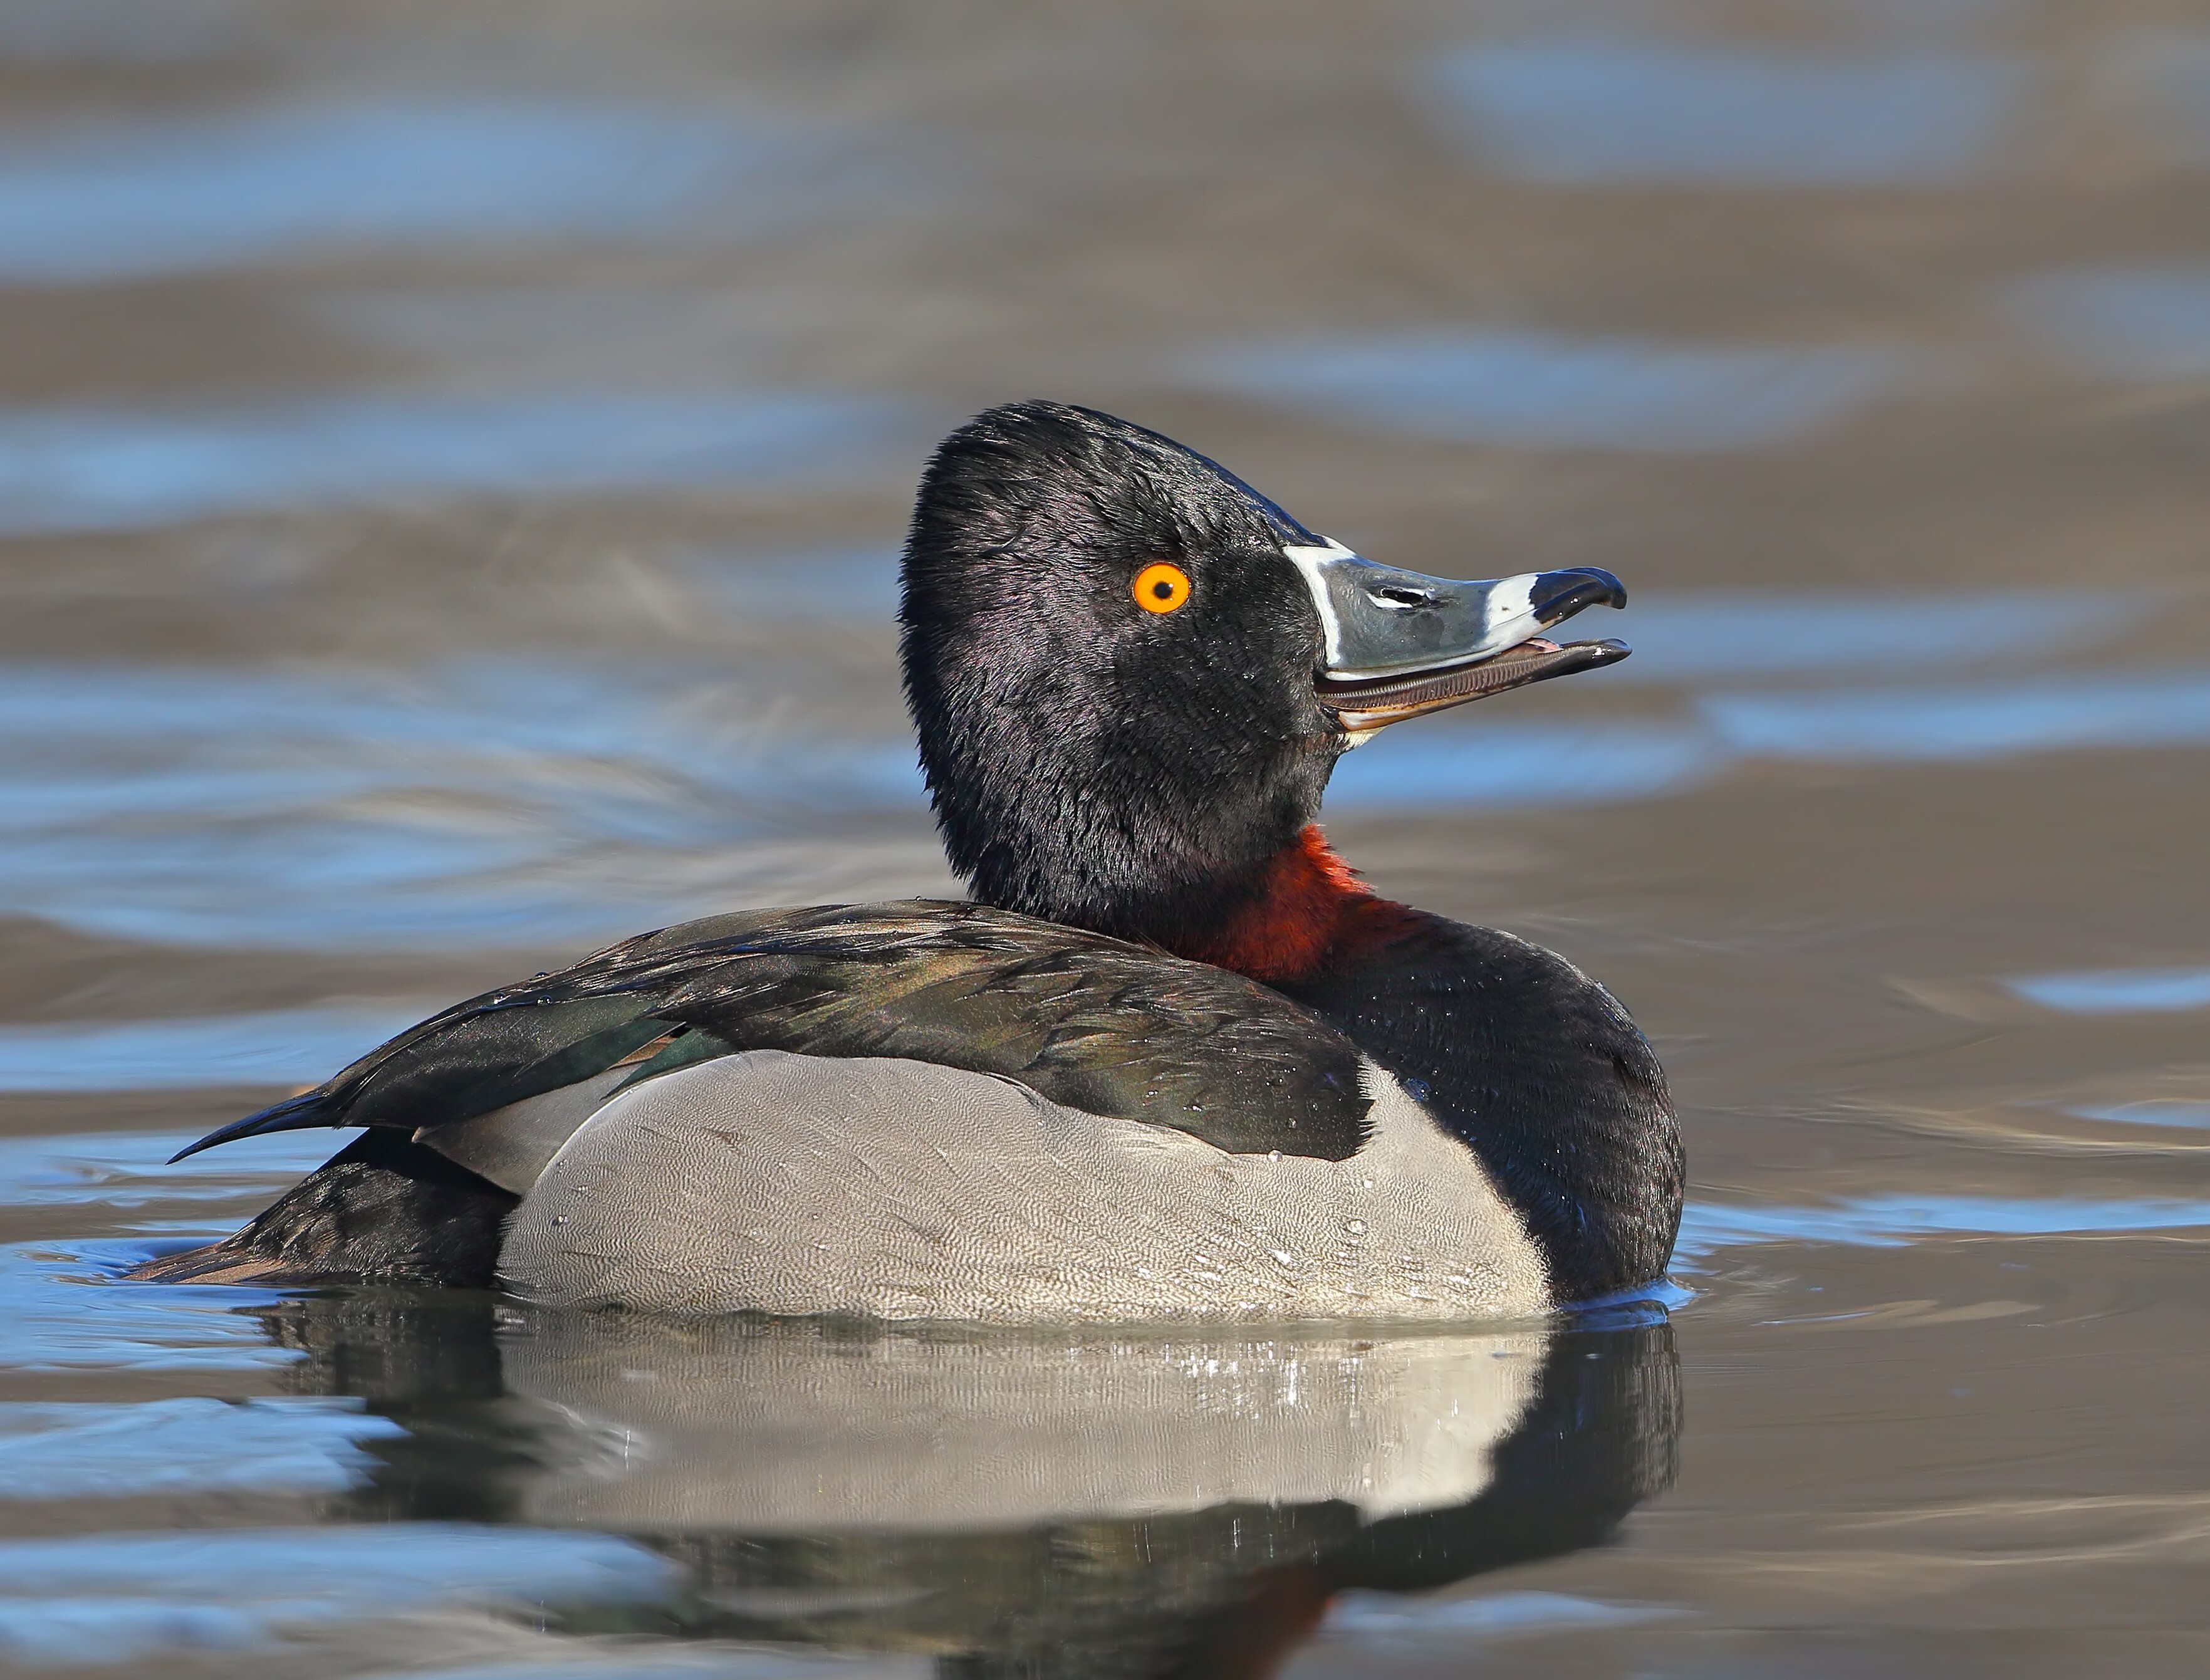 Wintering waterfowl at Oakland Lake sometimes include less common species like the Ring-necked Duck. Photo: <a href="https://www.flickr.com/photos/120553232@N02/" target="_blank">Isaac Grant</a>